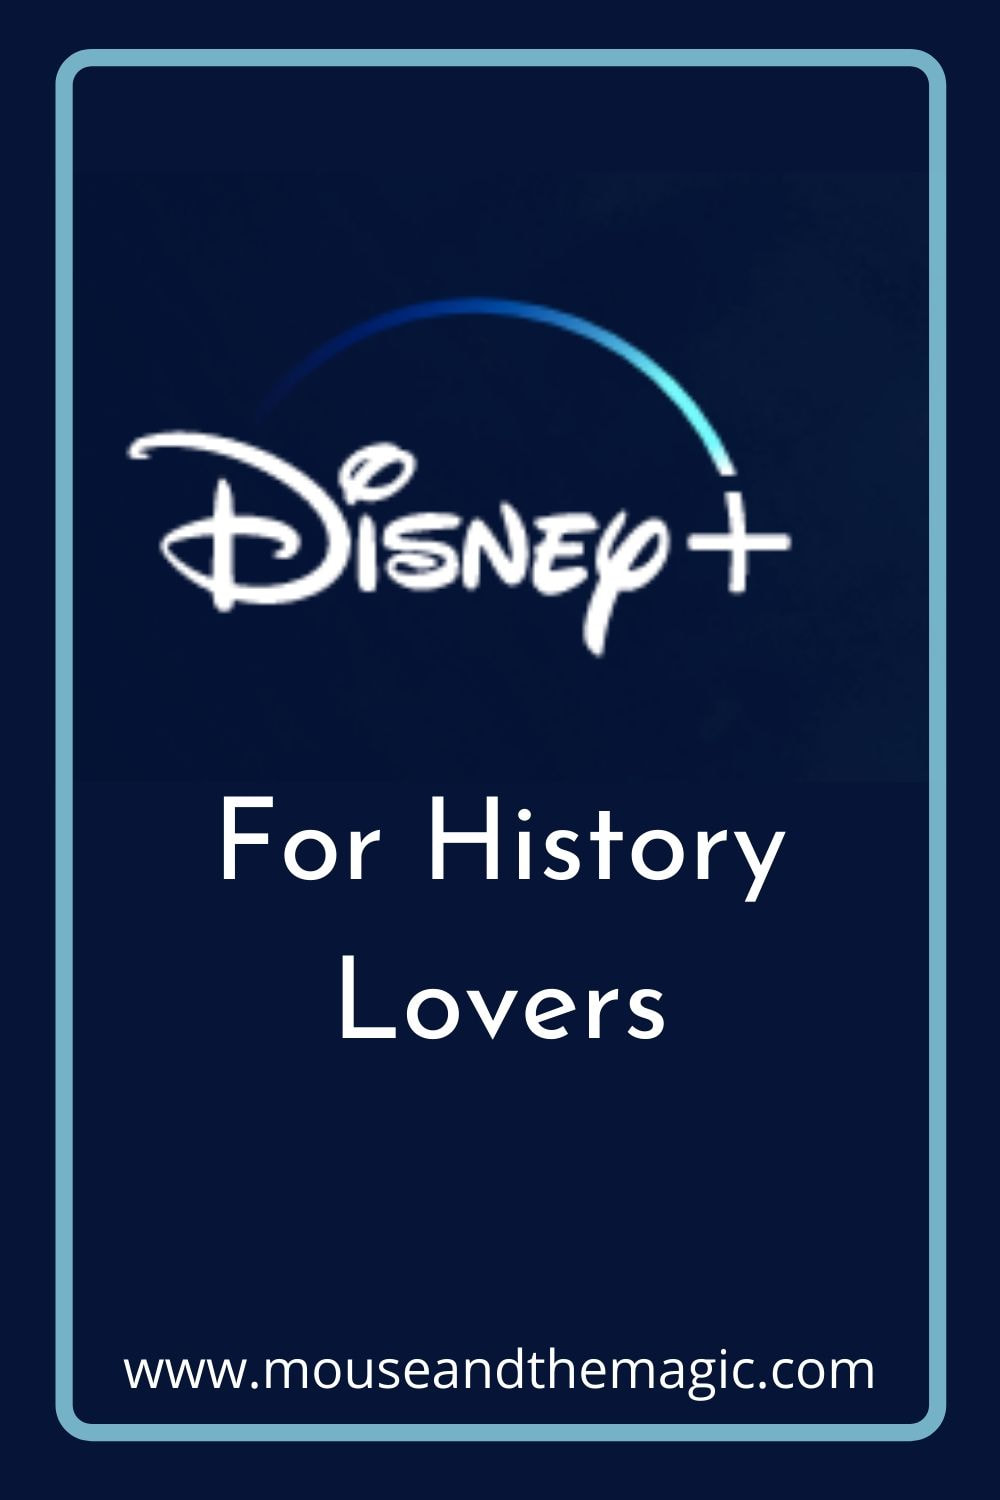 Disney Plus For History Lovers